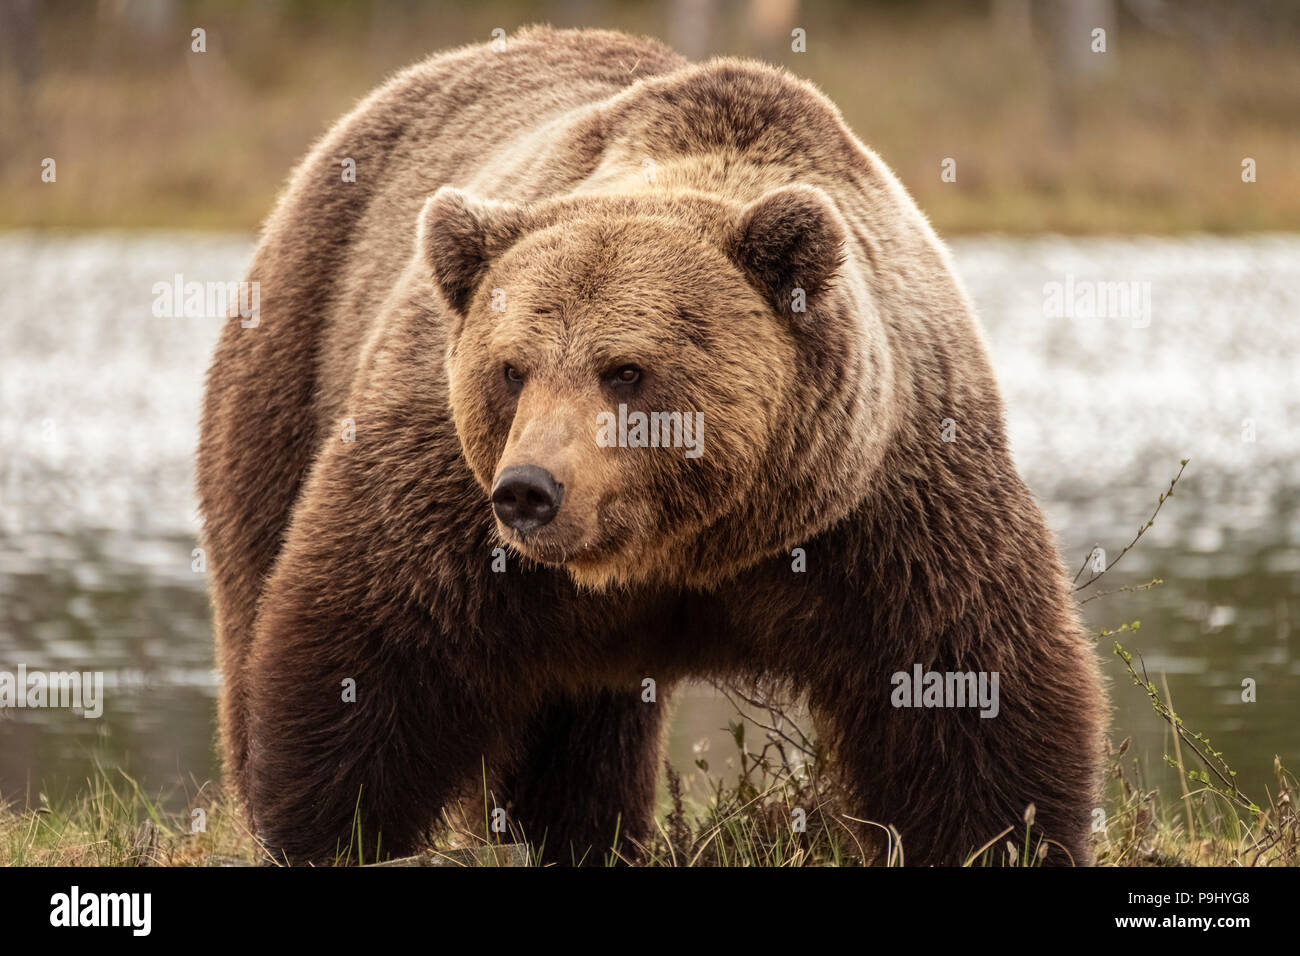 Eurasian brown bear in forest in Finland Stock Photo